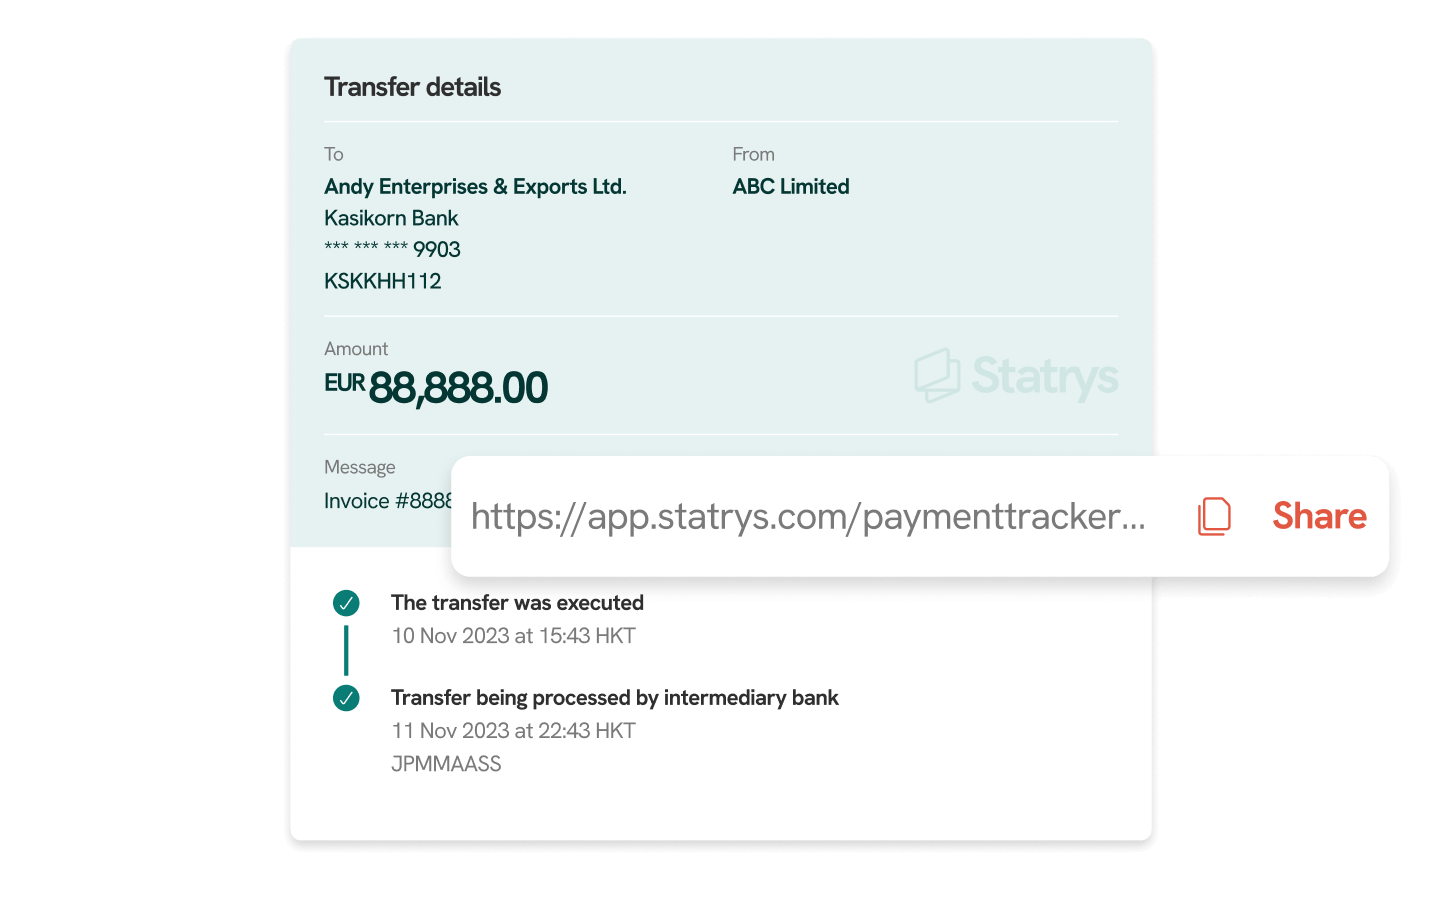 A screen of the SWIFT payment tracking on the Statrys platform.